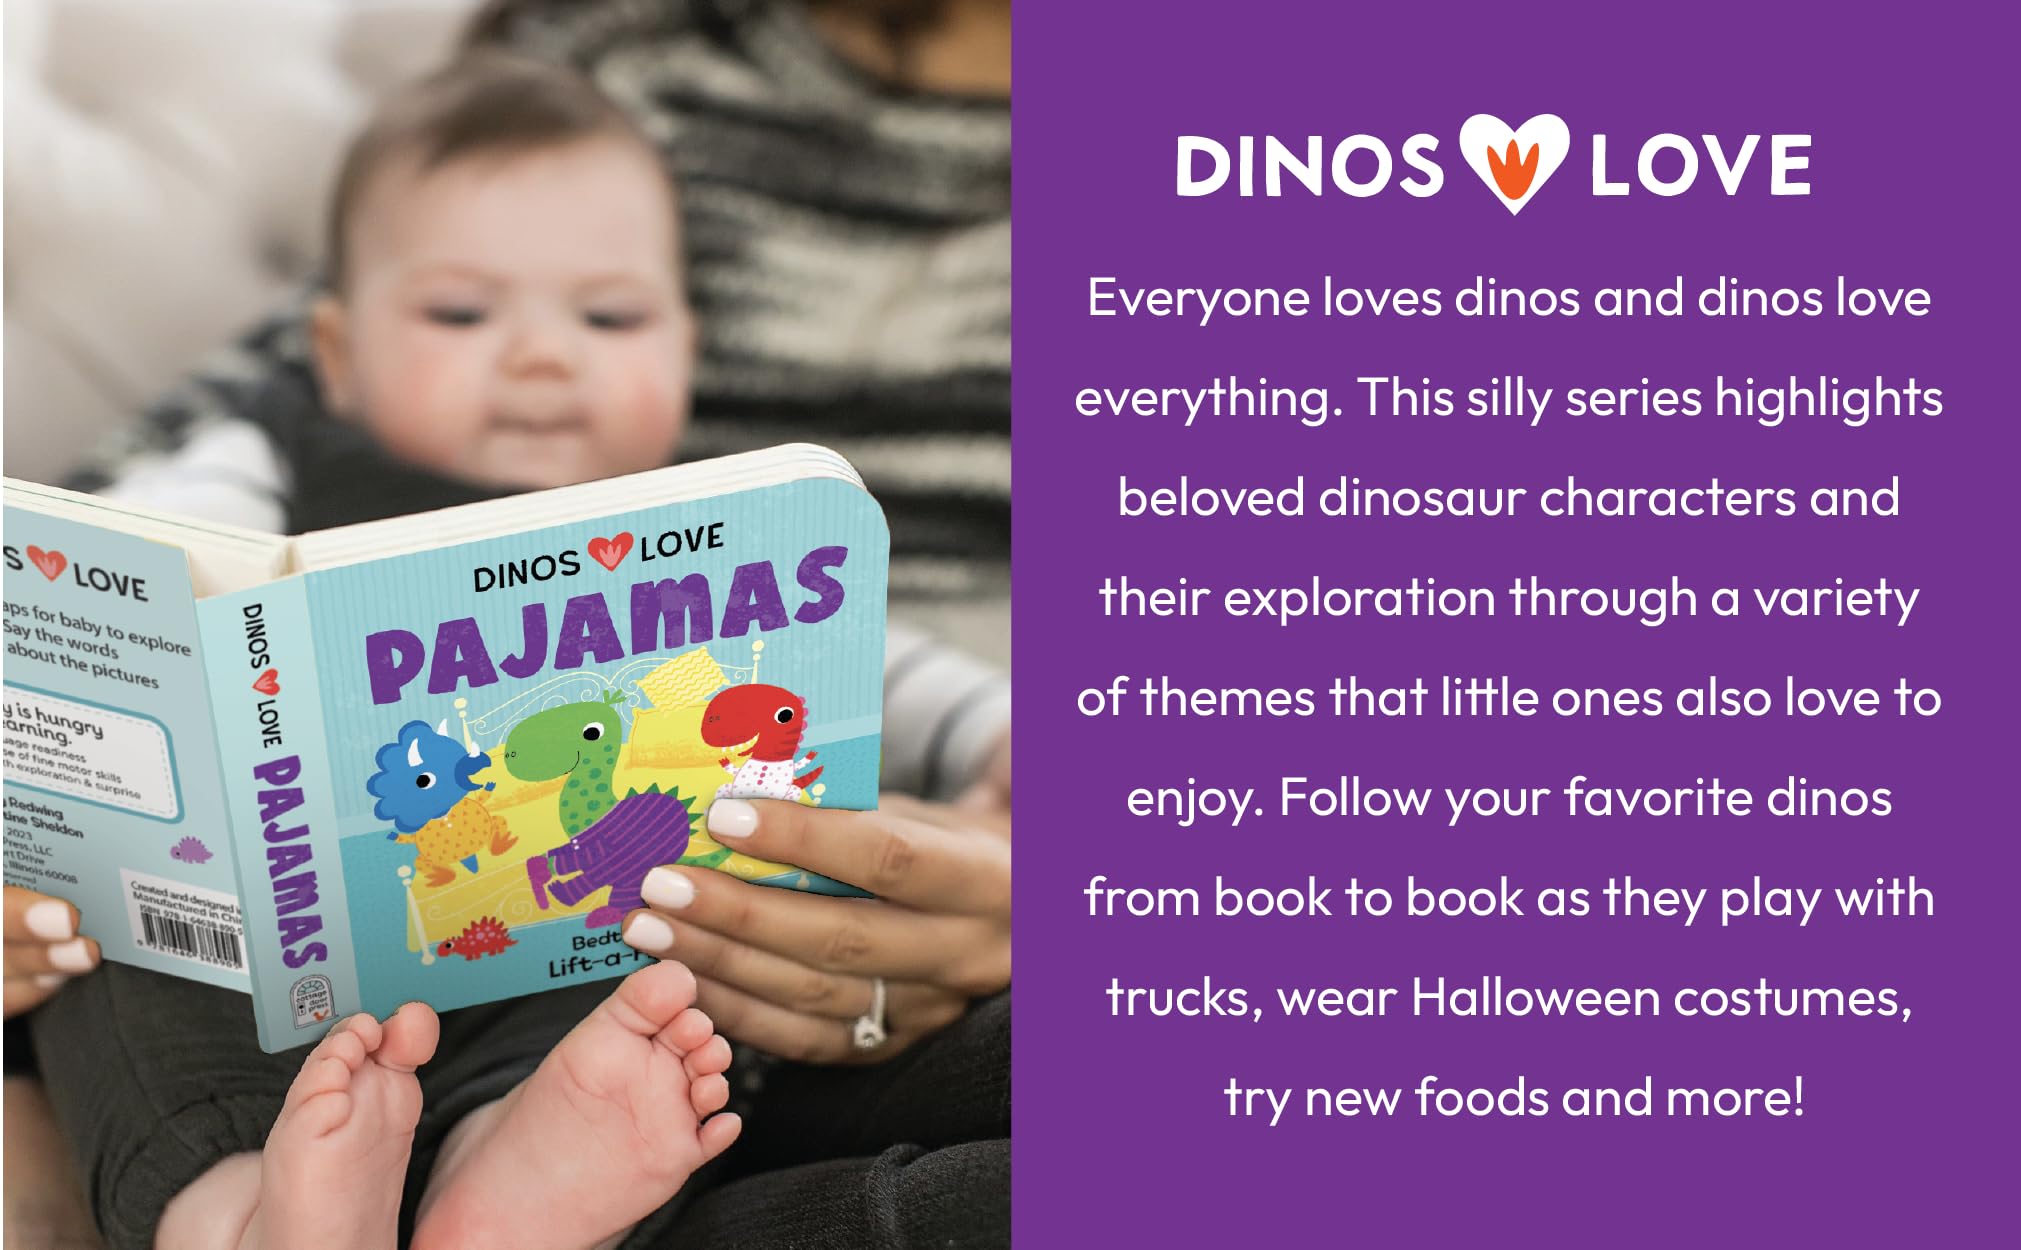 Dinos Love Donuts - A Foodie Lift-a-Flap Board Book for Babies and Toddlers to Introdue Trying New Foods; A Fun Dinosaur Adventure